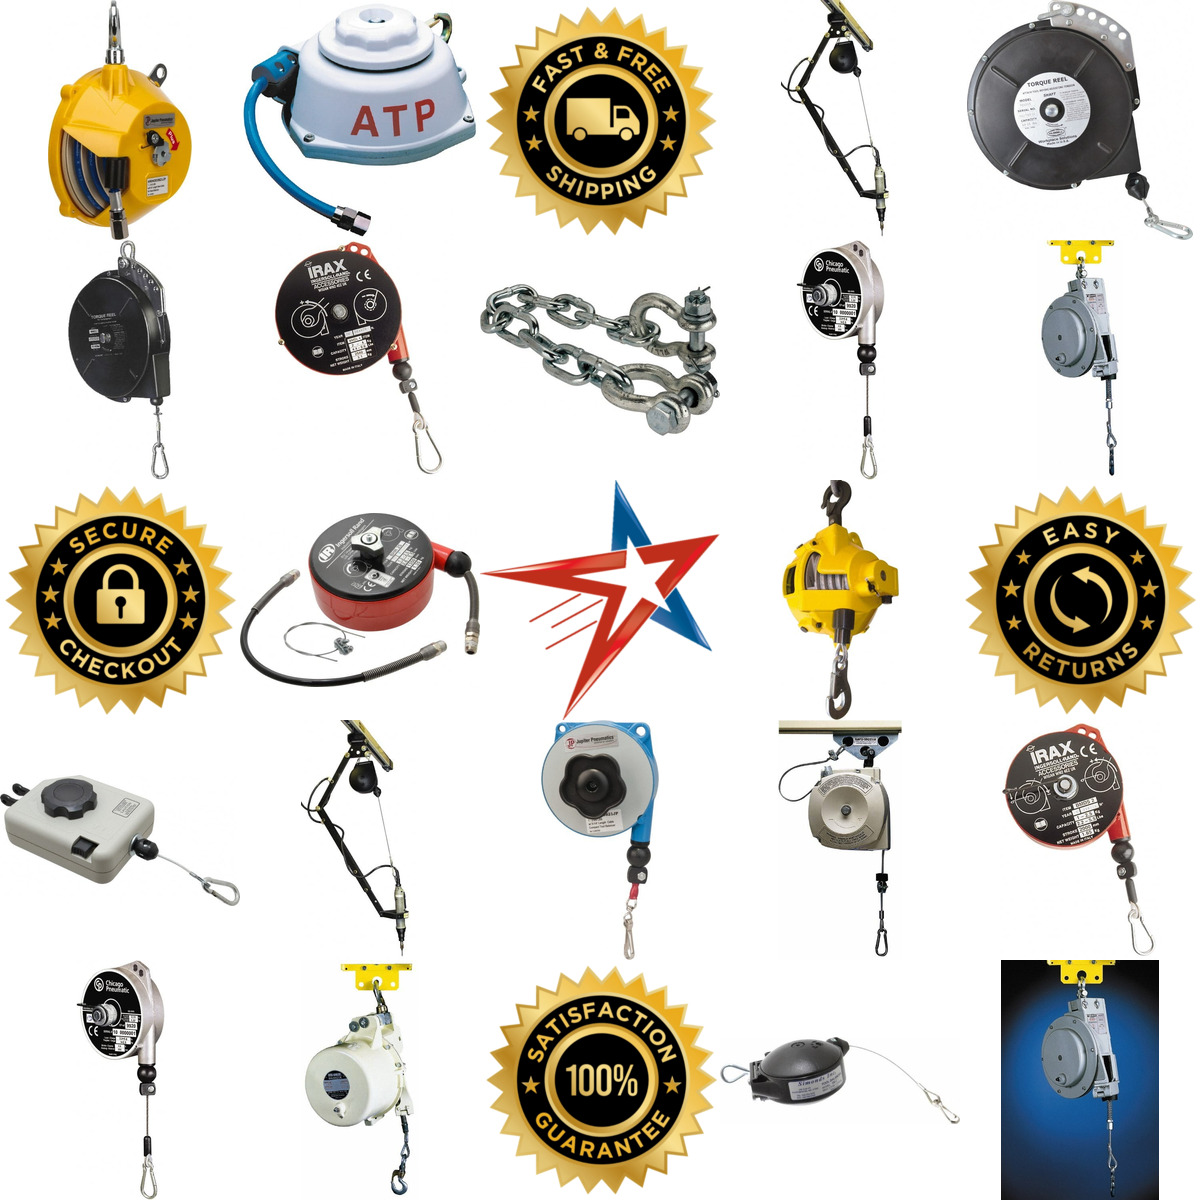 A selection of Tool Balancers and Accessories products on GoVets